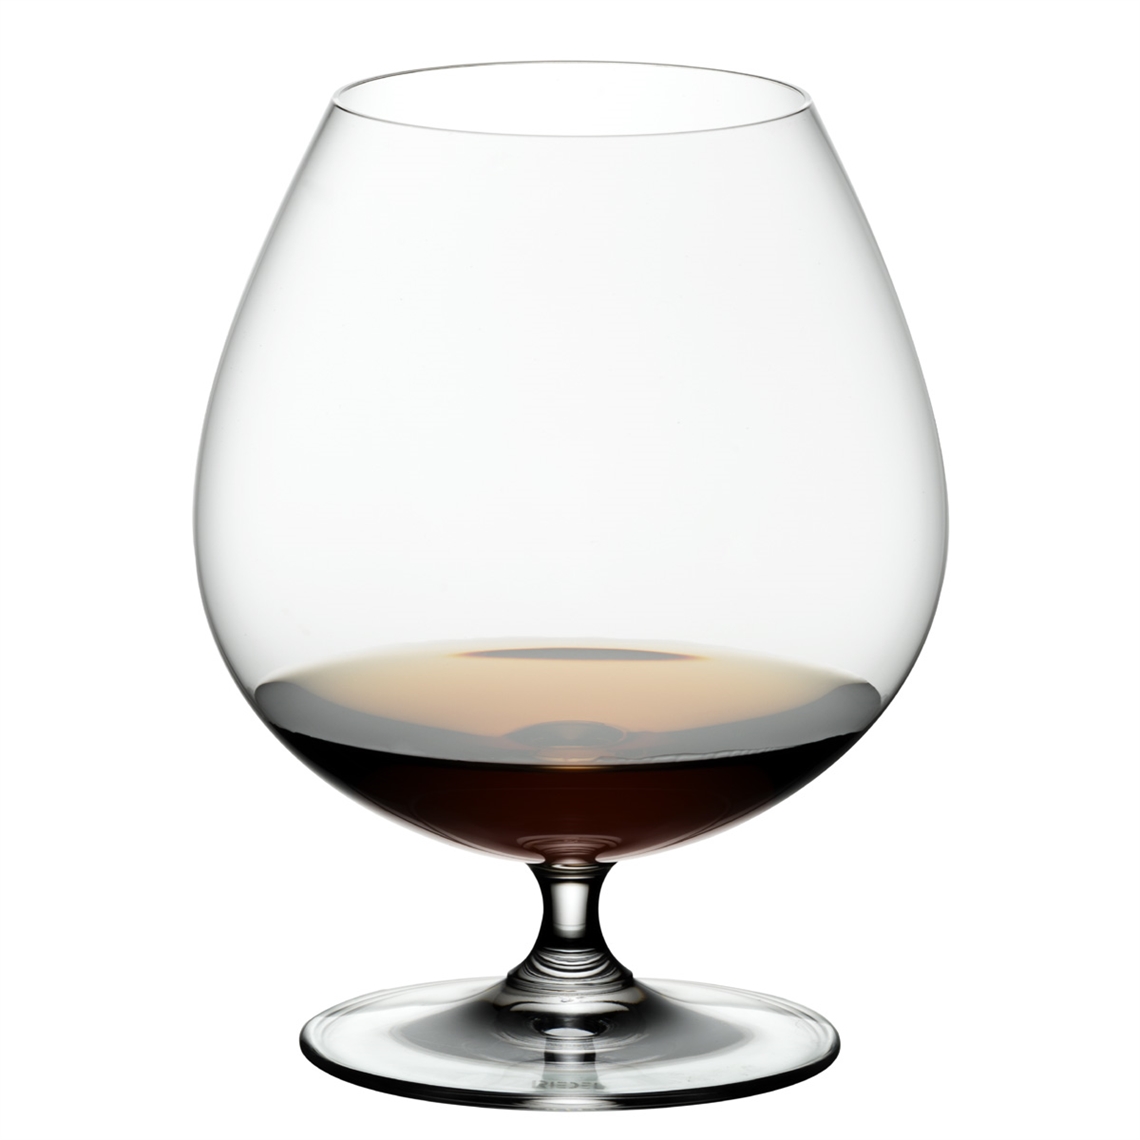 View more red wine glasses from our Spirit Glasses range